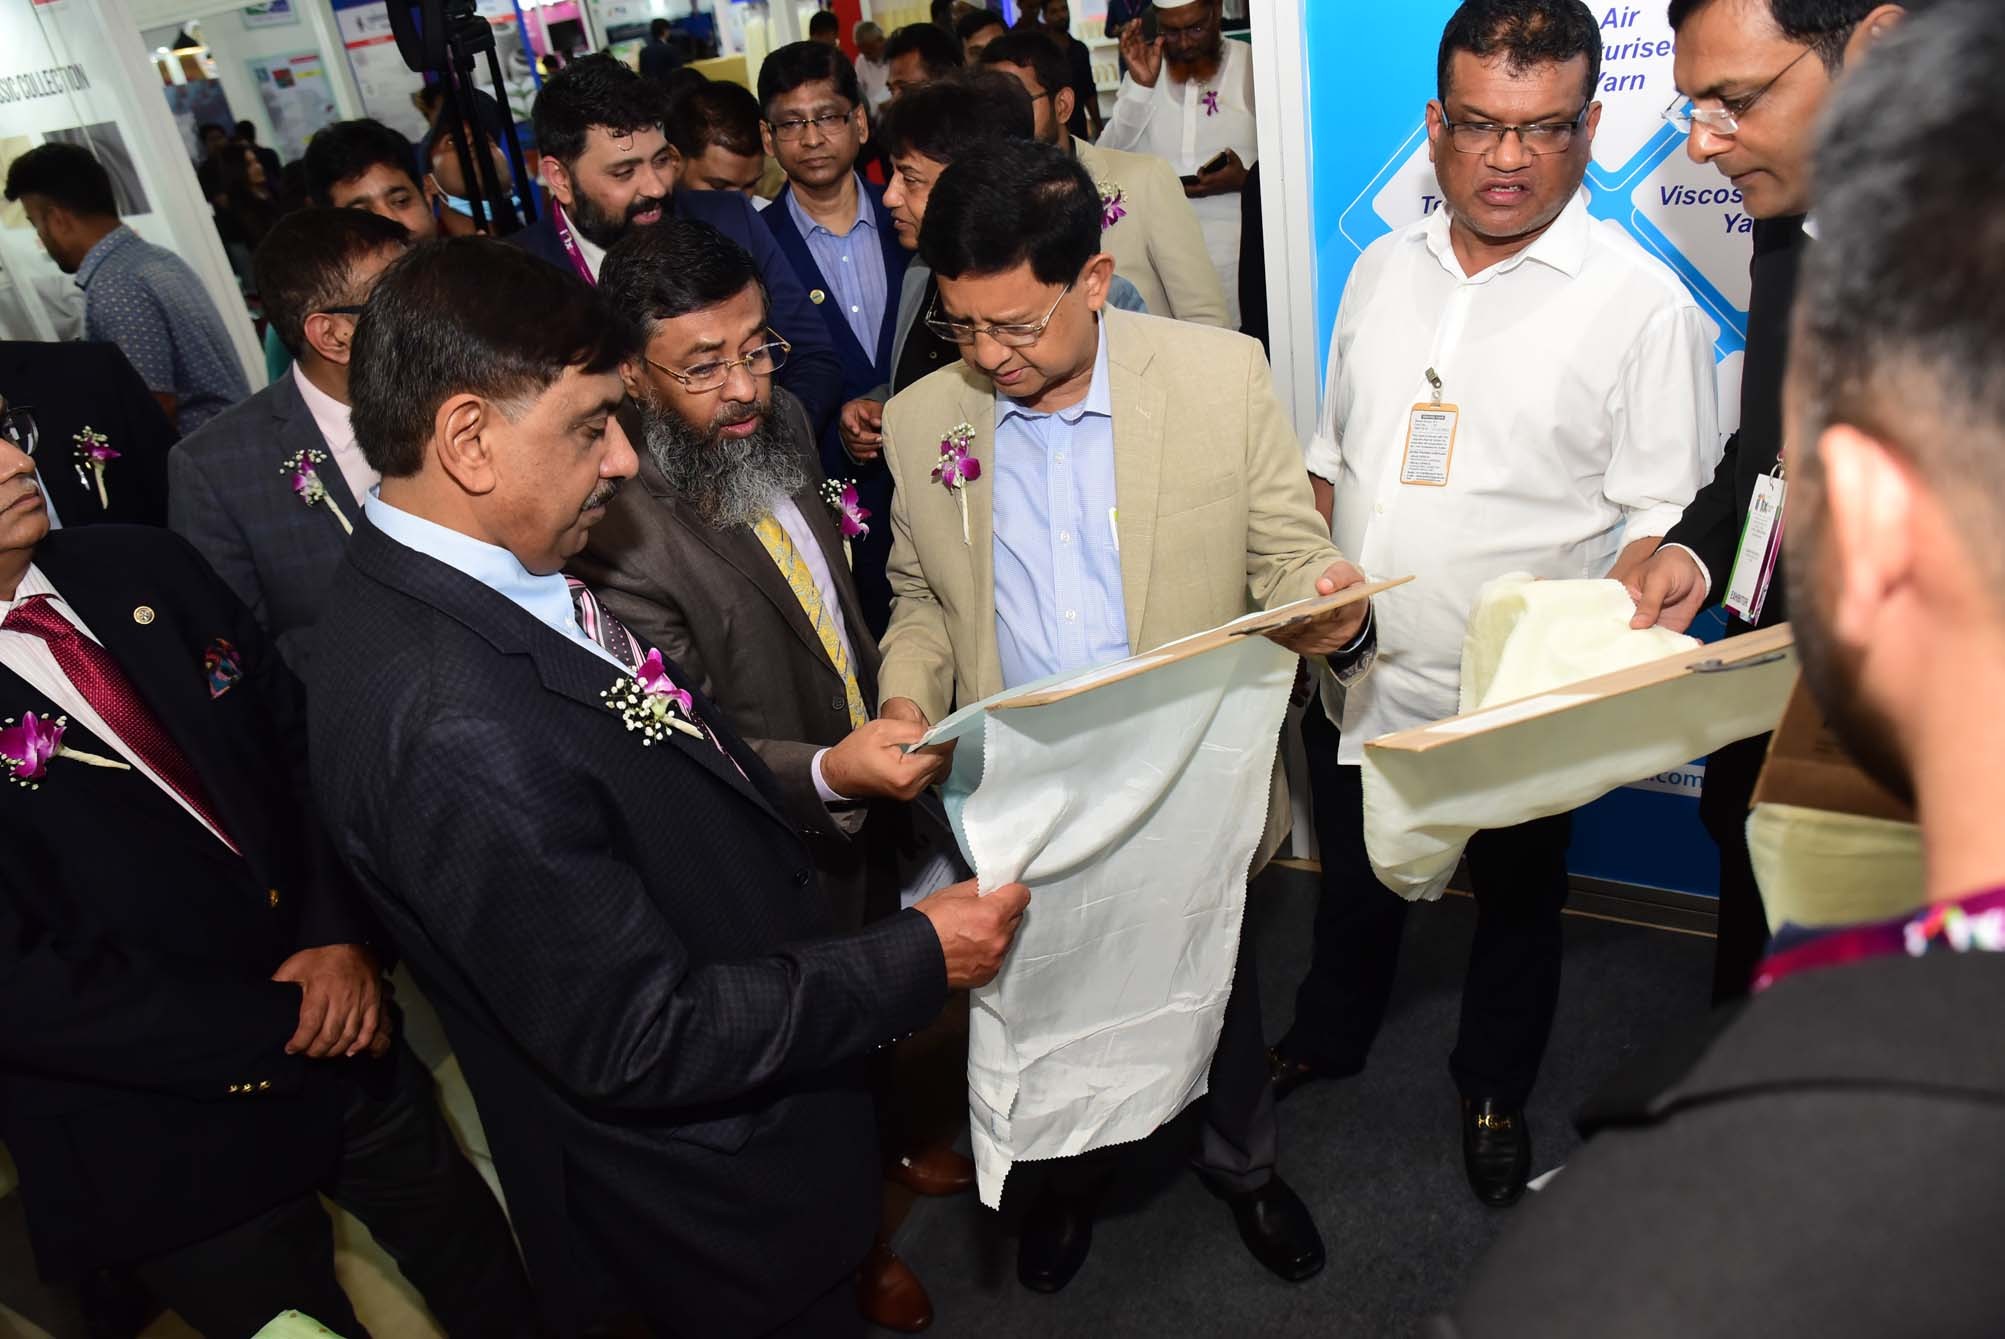 9th Intex South Asia - Bangladesh Edition in physical format  concludes with resounding success!